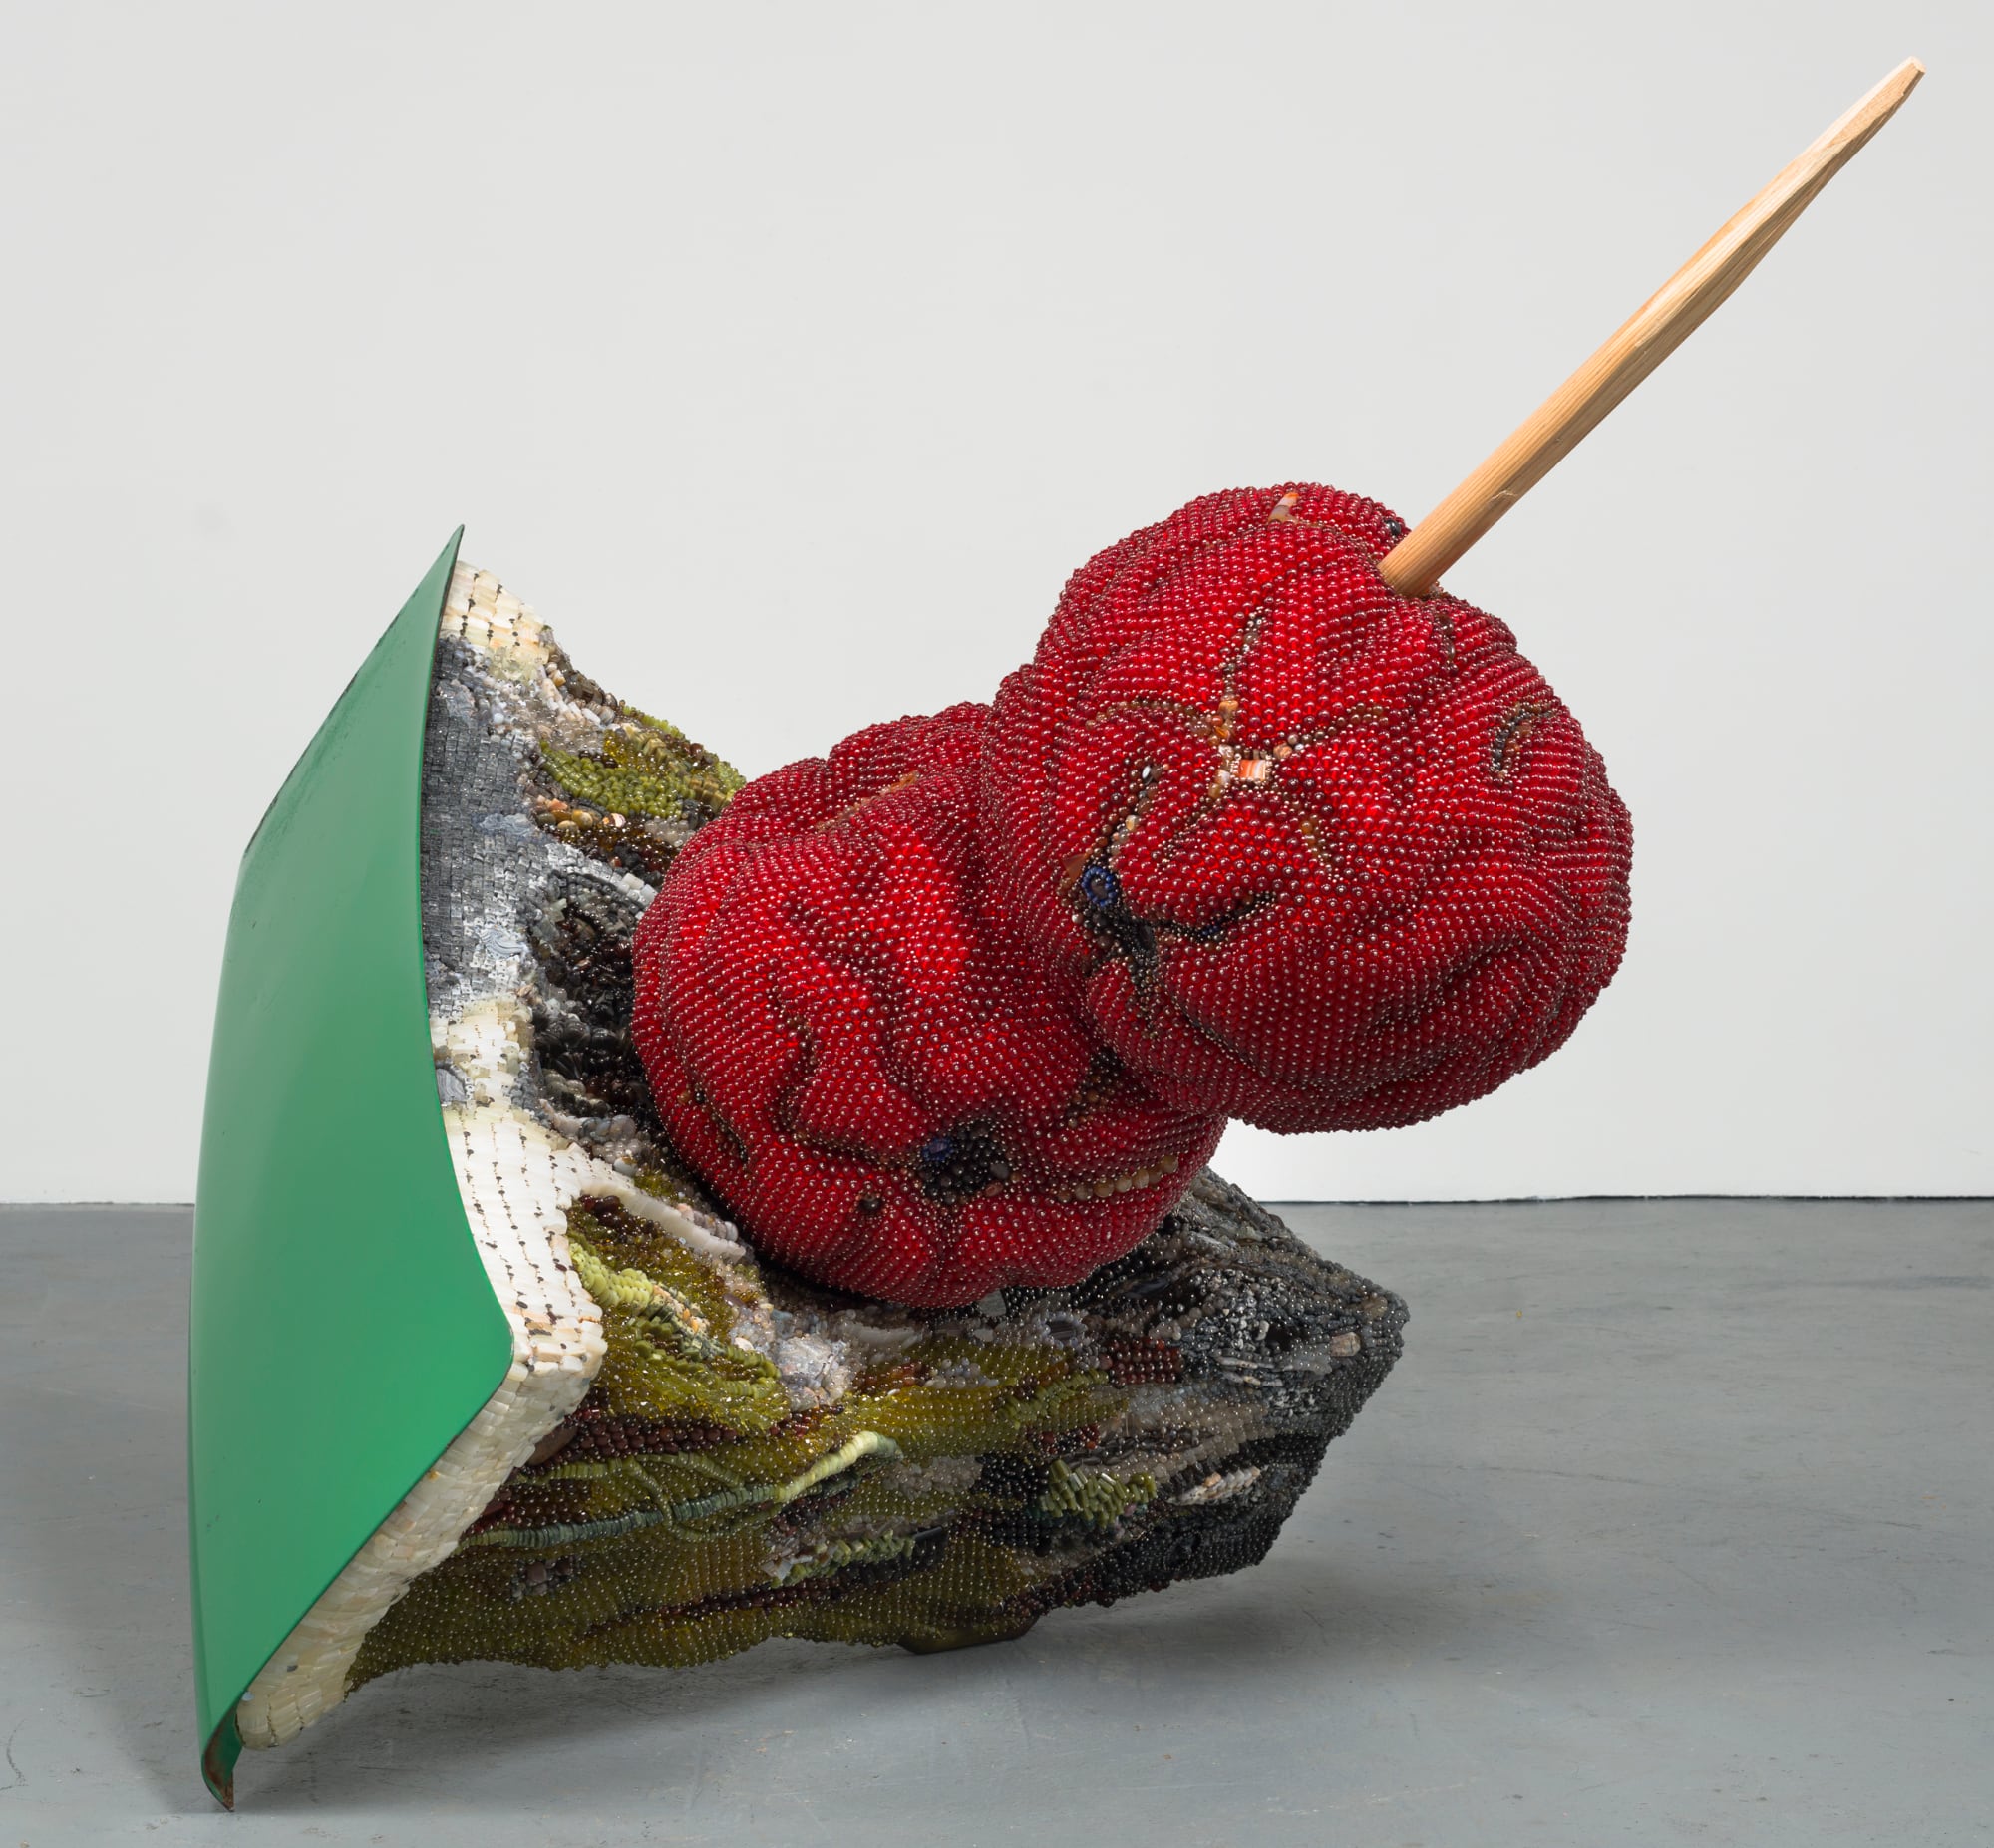 Glitzy Rotting Fruit and Rusted Automobiles by Kathleen Ryan Consider the Tensions of American Consumerism